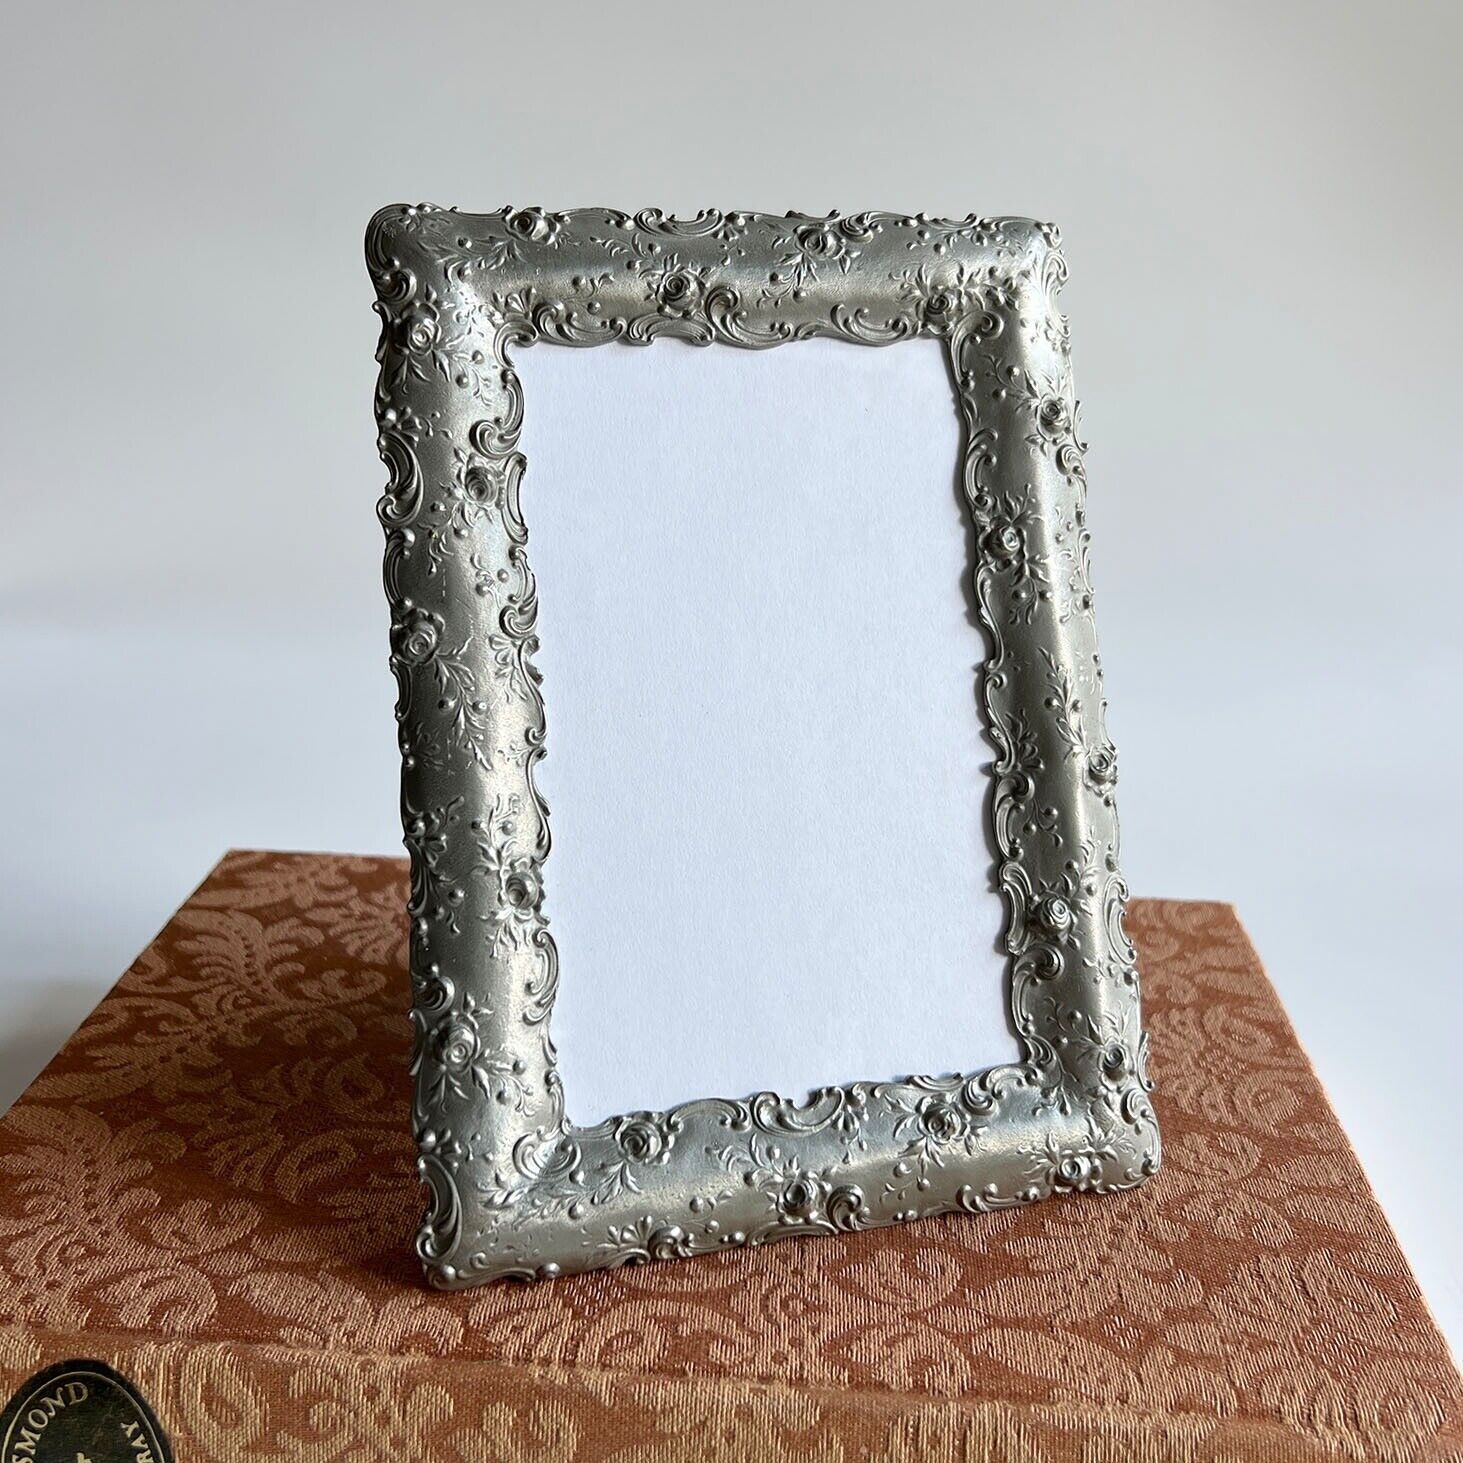 Vintage Frame Gorham Pewter  Floral Silver Tone Frame 7x5 for 4x6 Table or Wall